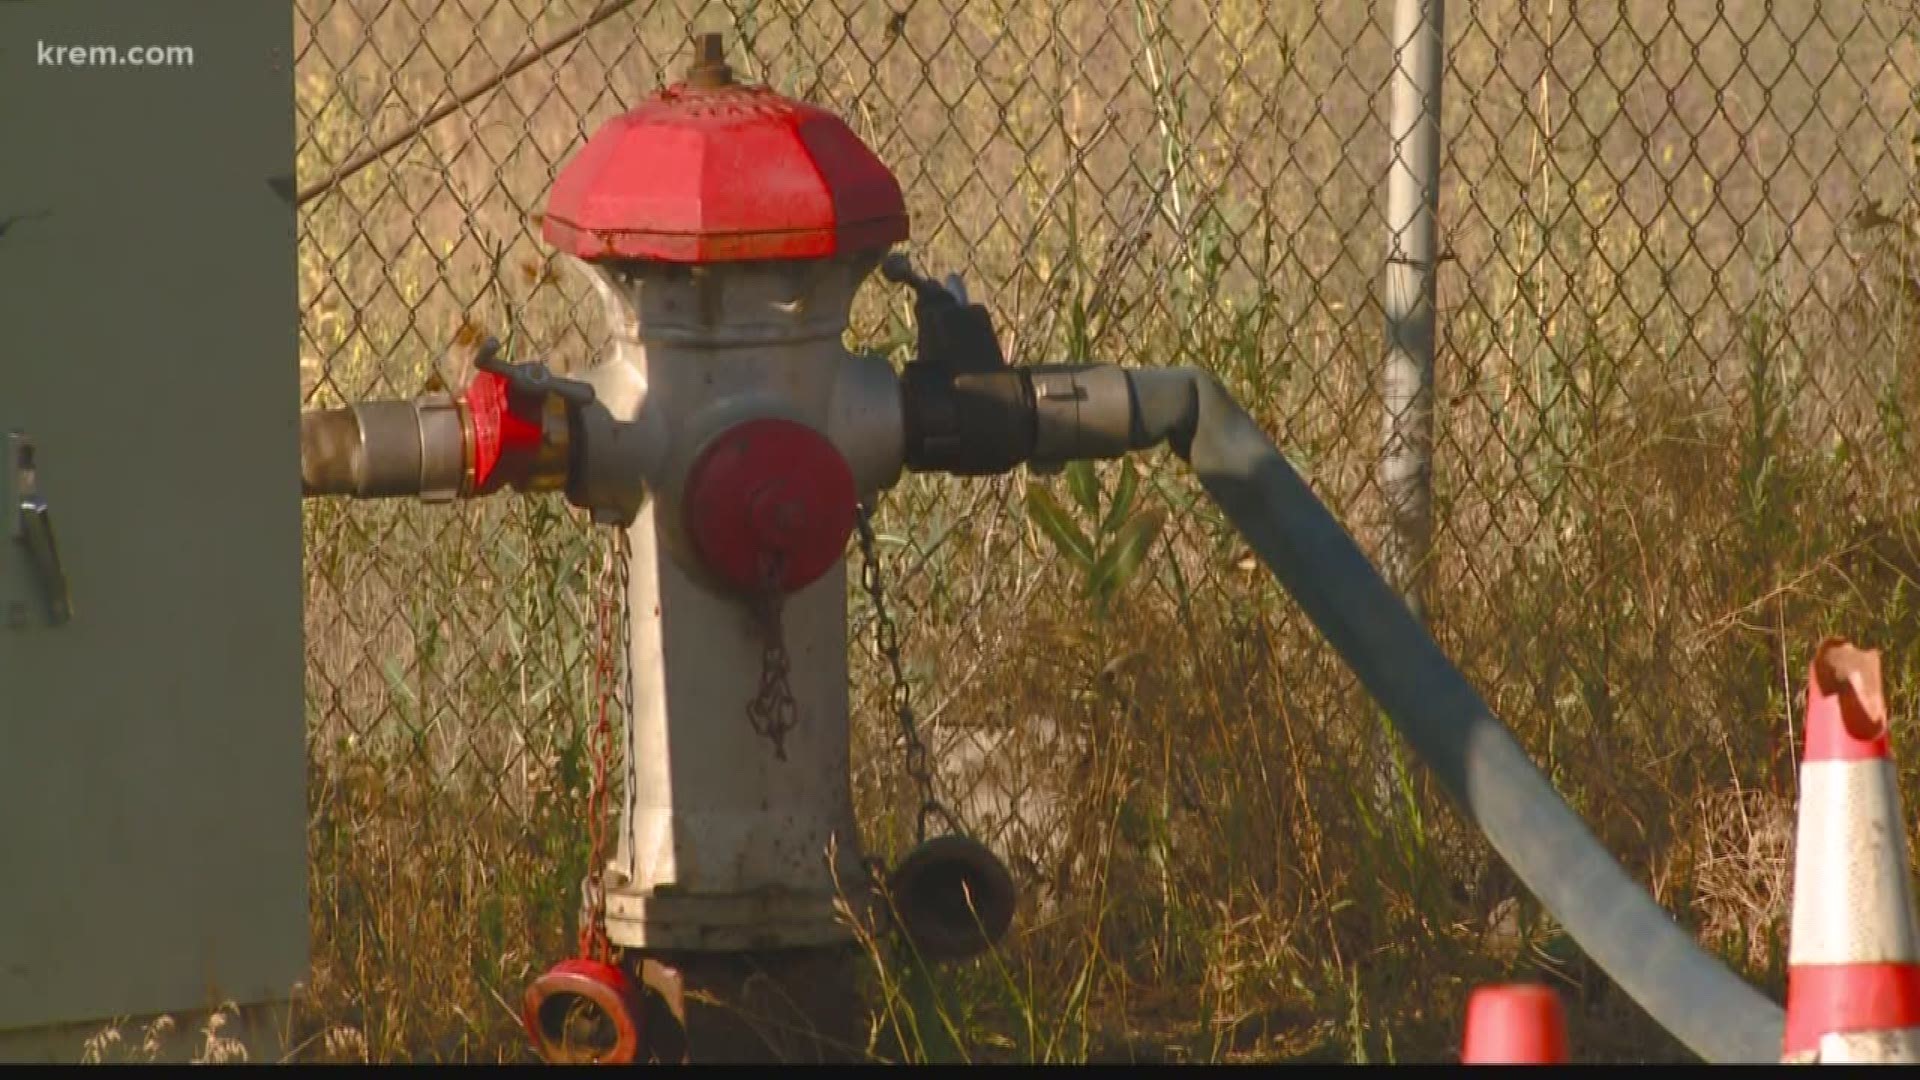 The contamination occurred when a commercial hydroseed truck pumping water from a hydrant allowed backflow into the water system. Now the City of Spokane is looking into ways to make sure a similar incident doesn’t happen again.